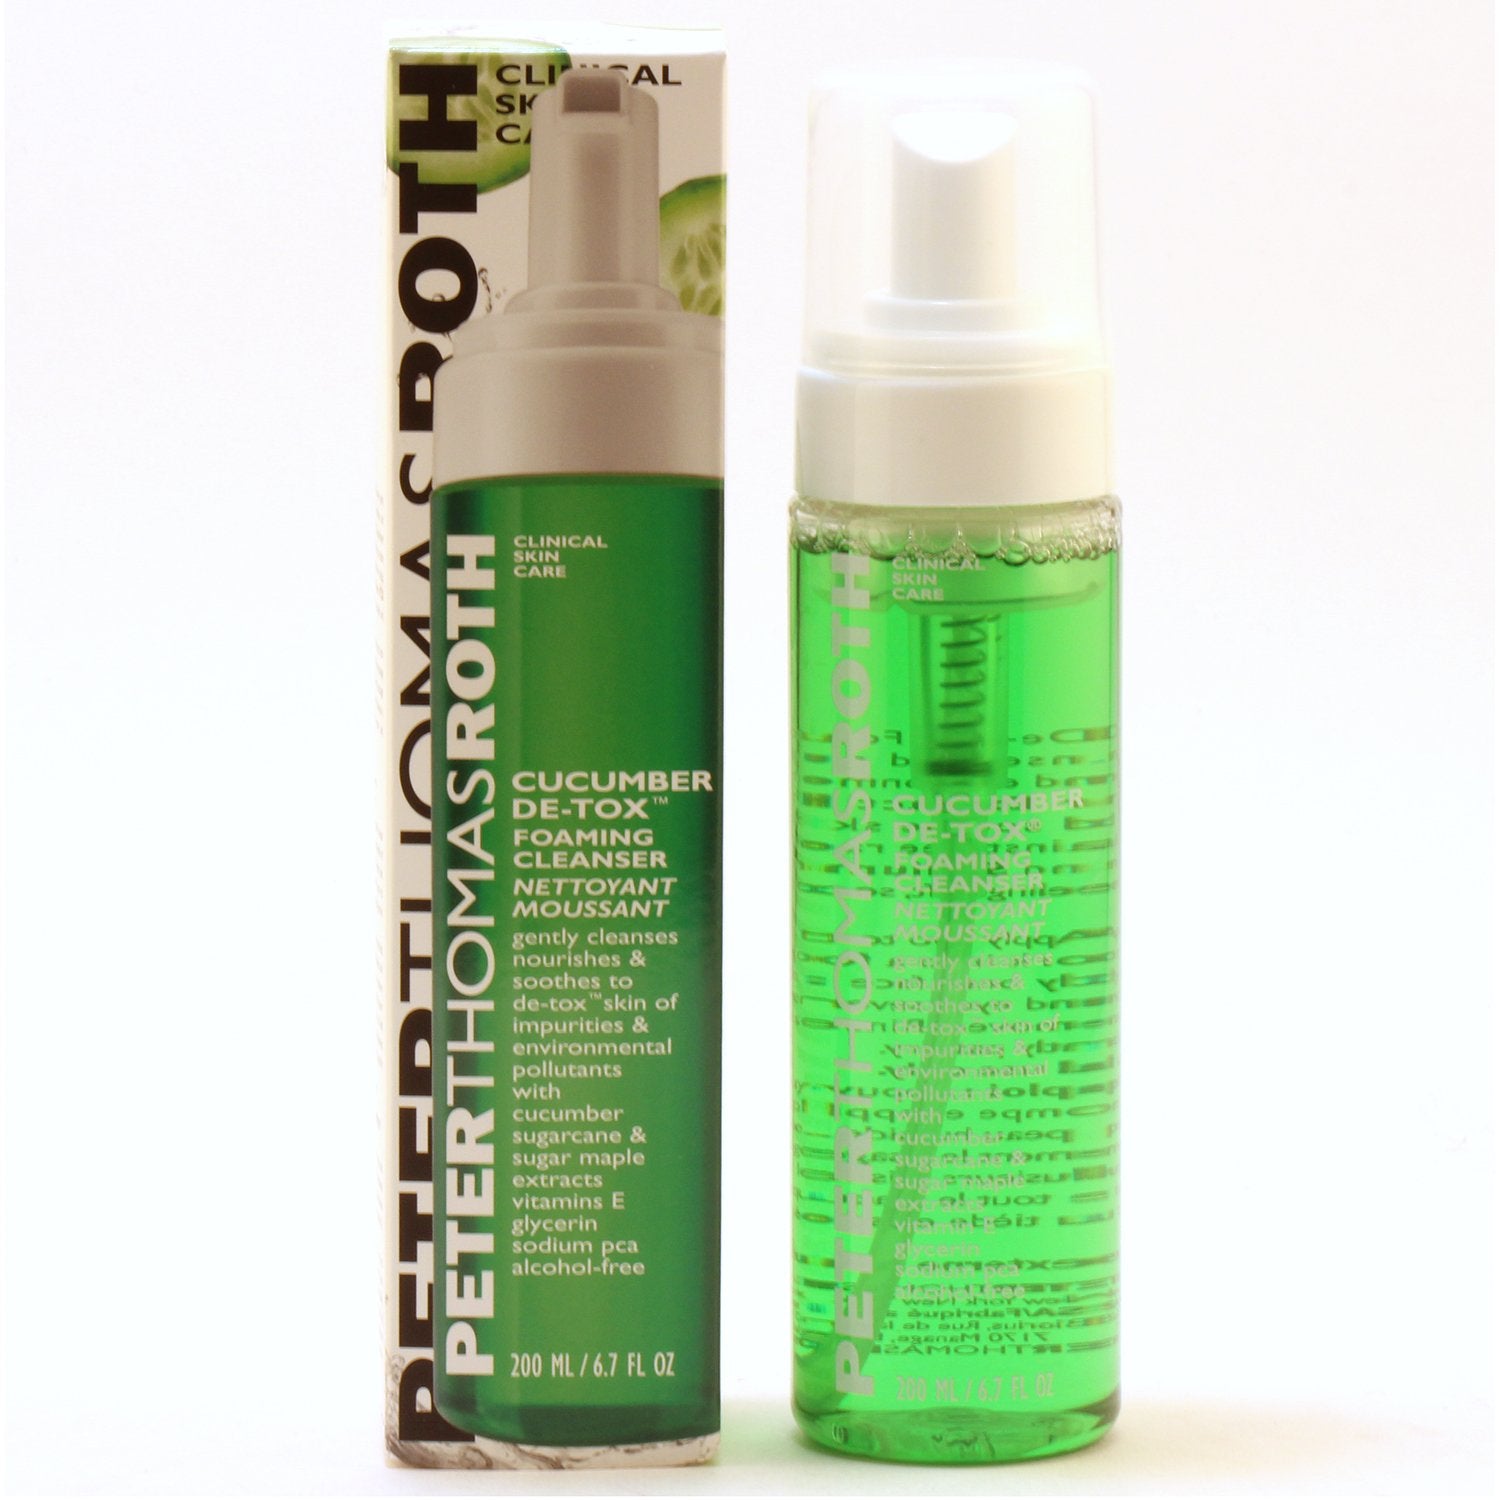 Skin Care - PETER THOMAS ROTH CUCUMBER DE-TOX FOAMING CLEANSER, 6.7 OZ